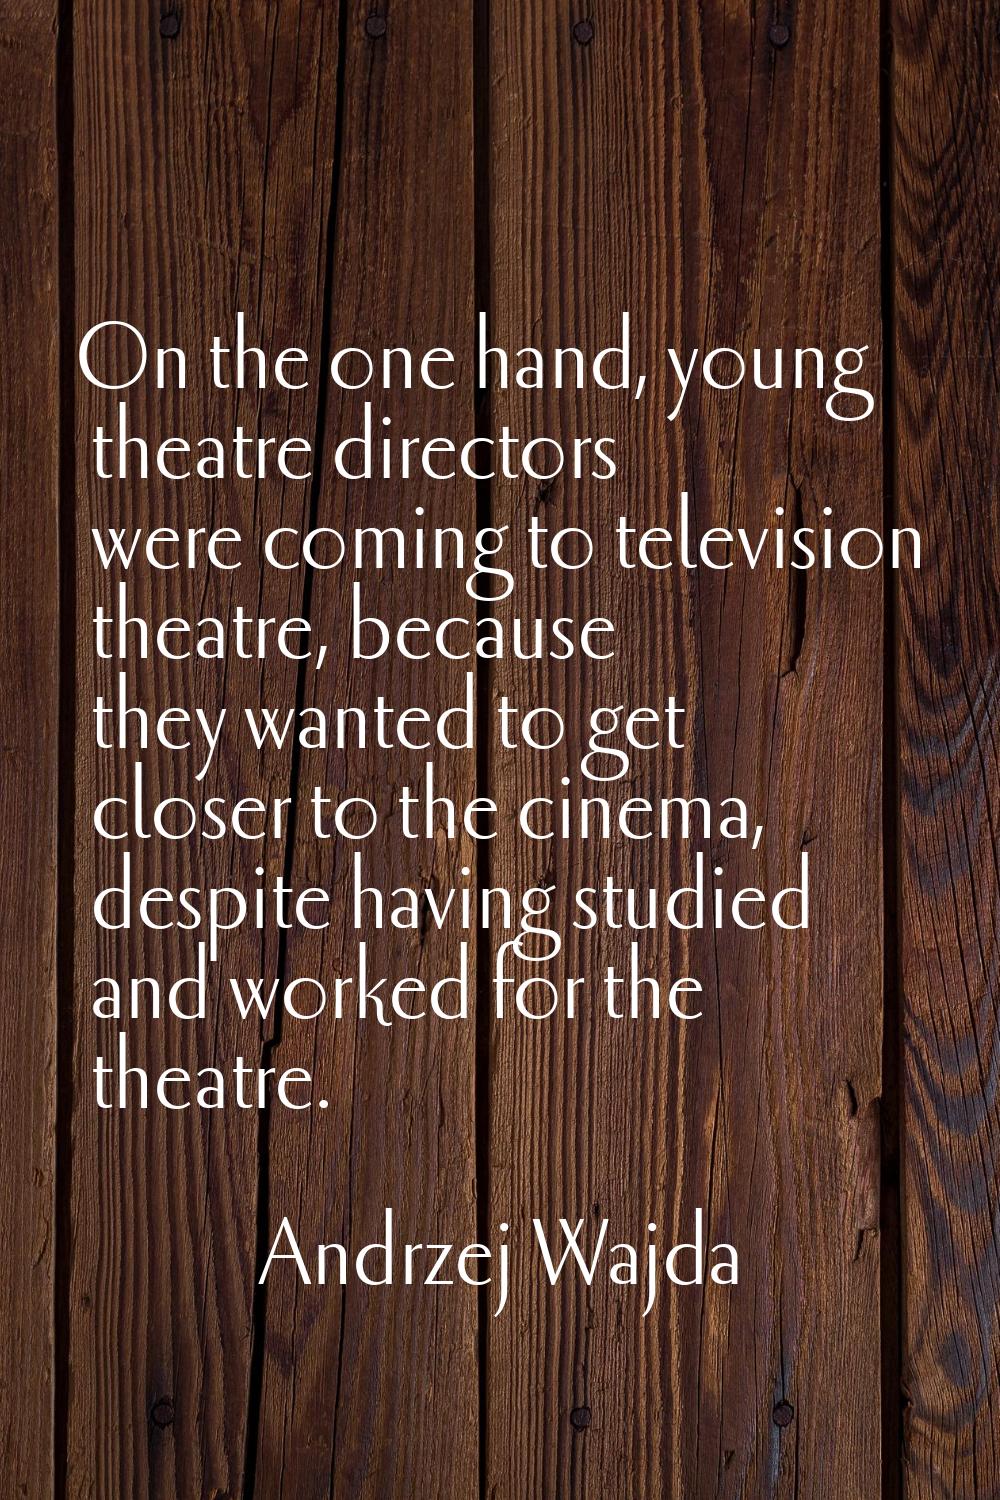 On the one hand, young theatre directors were coming to television theatre, because they wanted to 